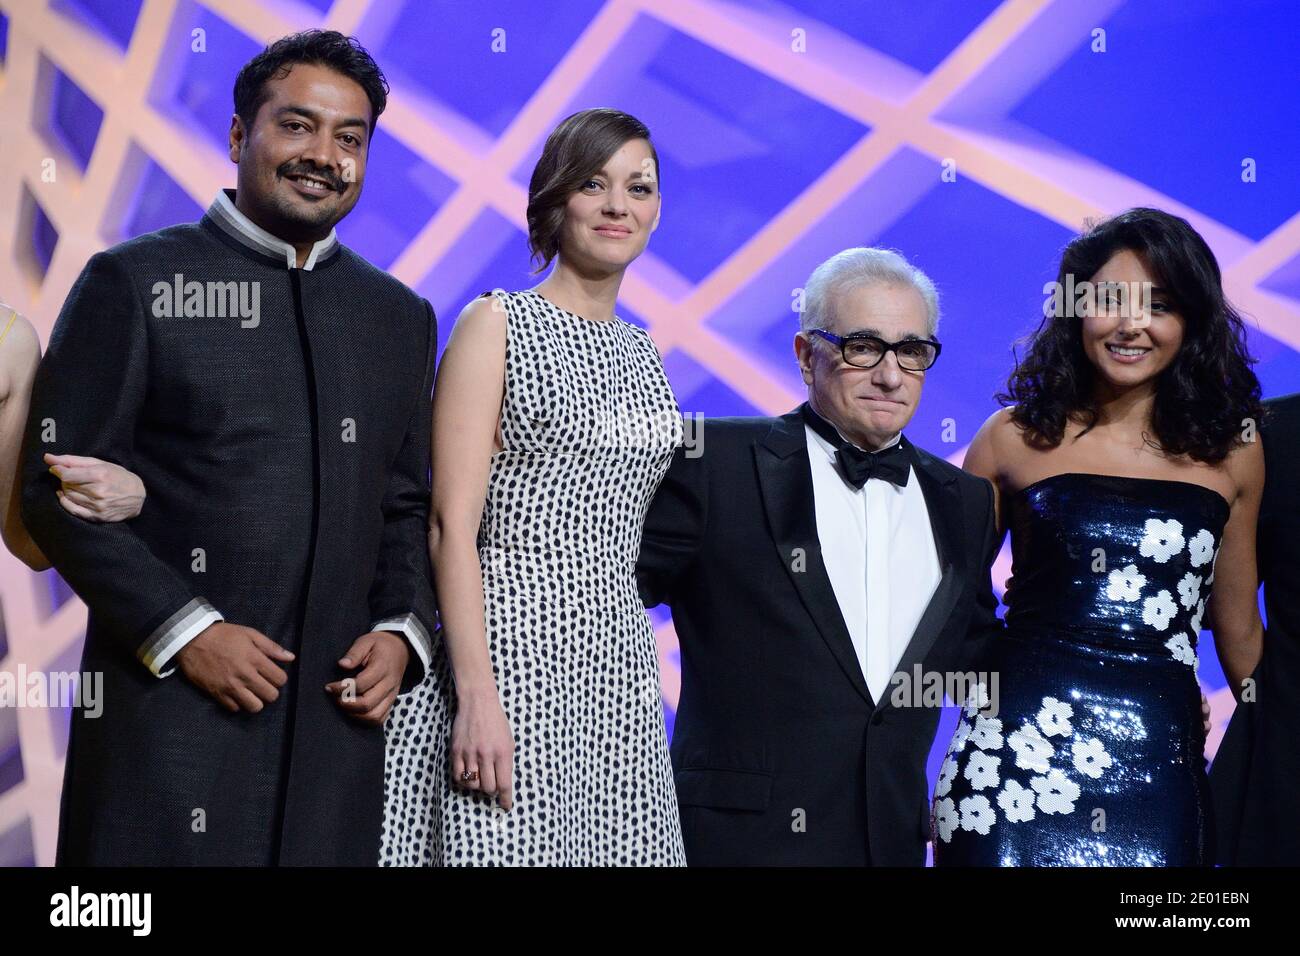 Marion Cotillard and Martin Scorsese attending the 13th Marrakech Film Festival opening ceremony in Marrakech, Morocco on November 29, 2013. Photo by Nicolas Briquet/ABACAPRESS.COM Stock Photo